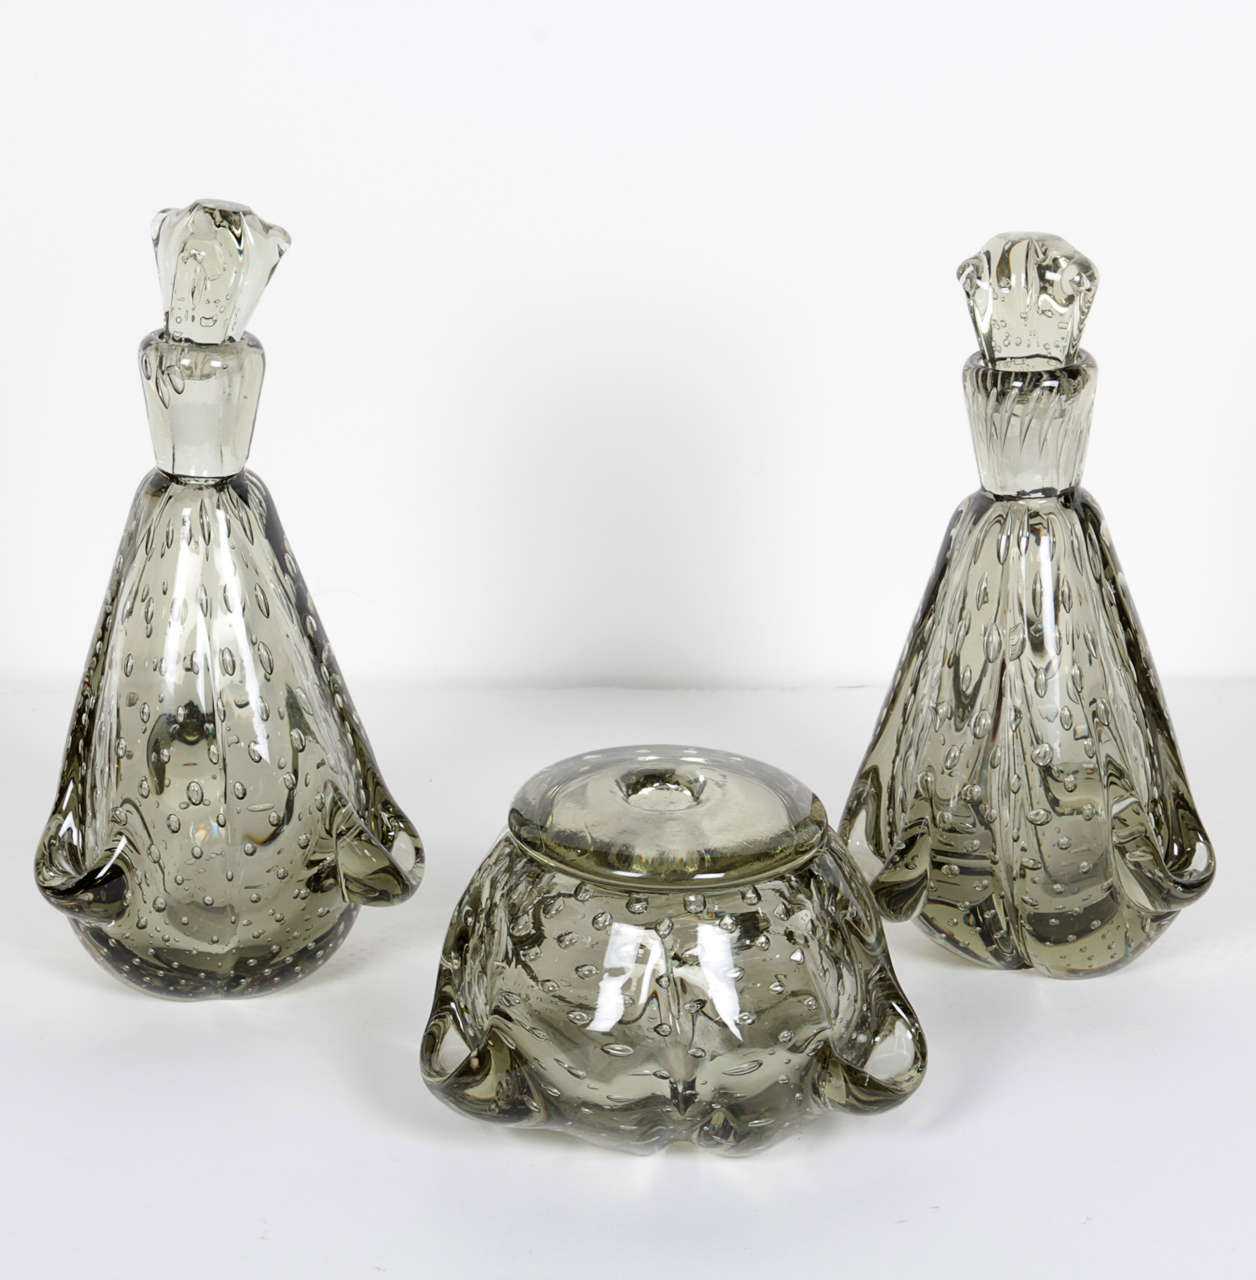 Beautiful and fine handblown Murano glass perfume set or vanity set. The glass has elegant free-form designs and is has details of bubble murines with a smokey grey cast. The set is comprised of two bottles or decanters with tops and a lidded bowl.